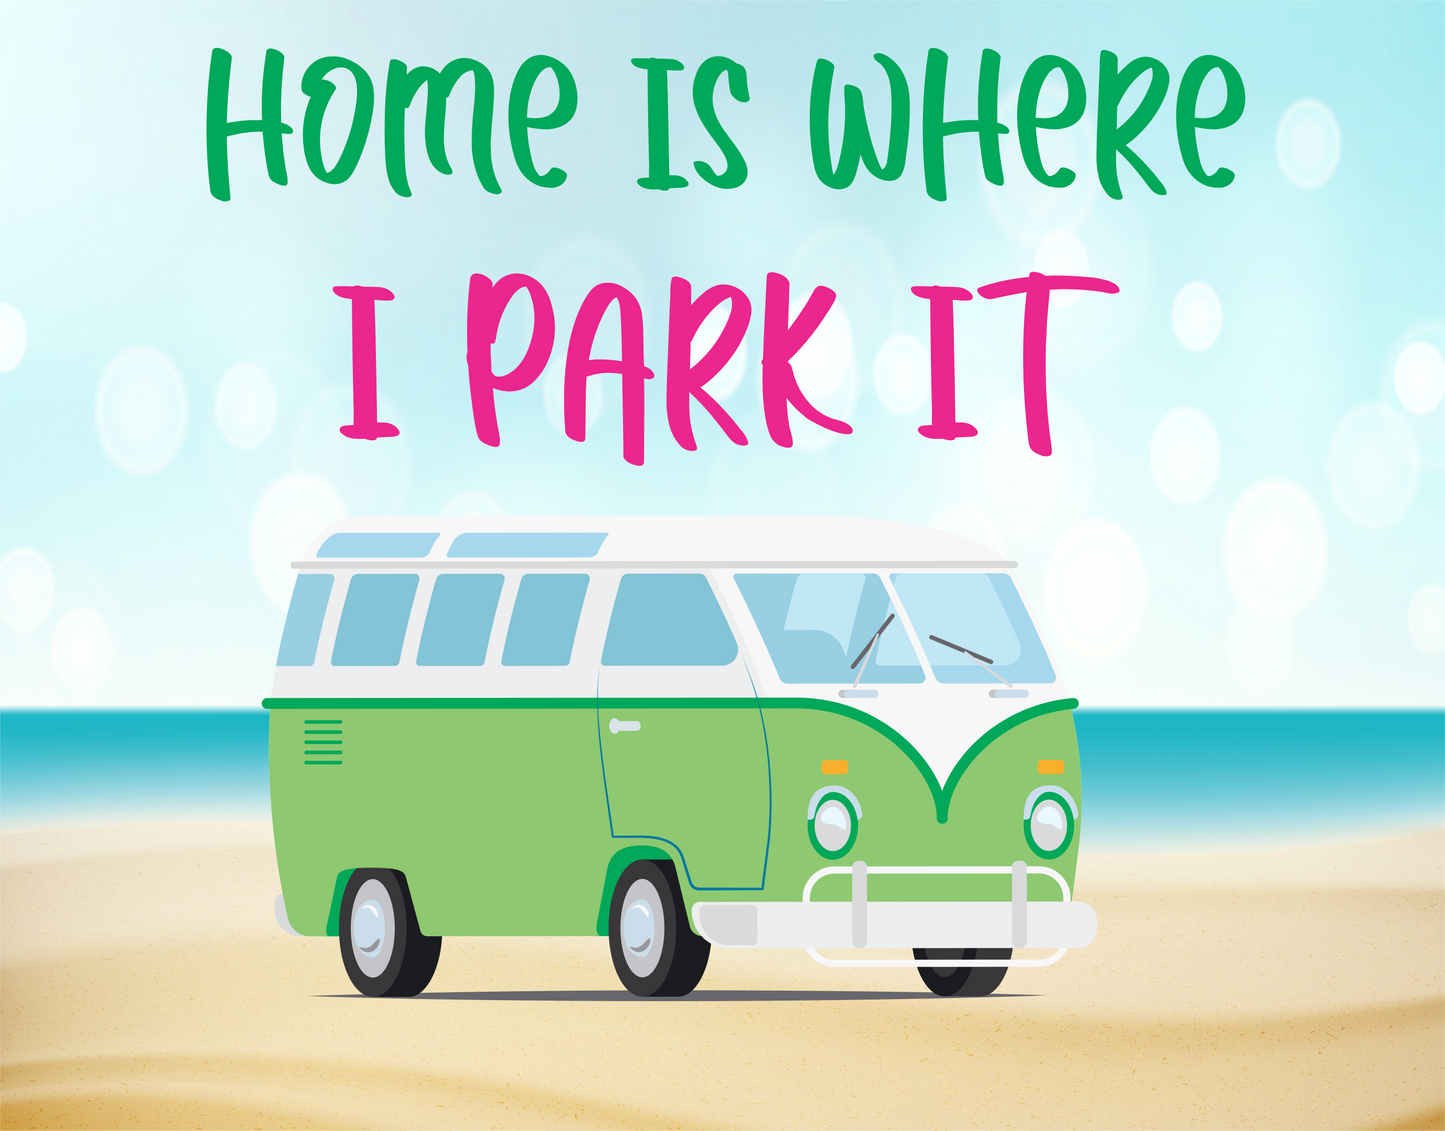 Home is where i park it green van